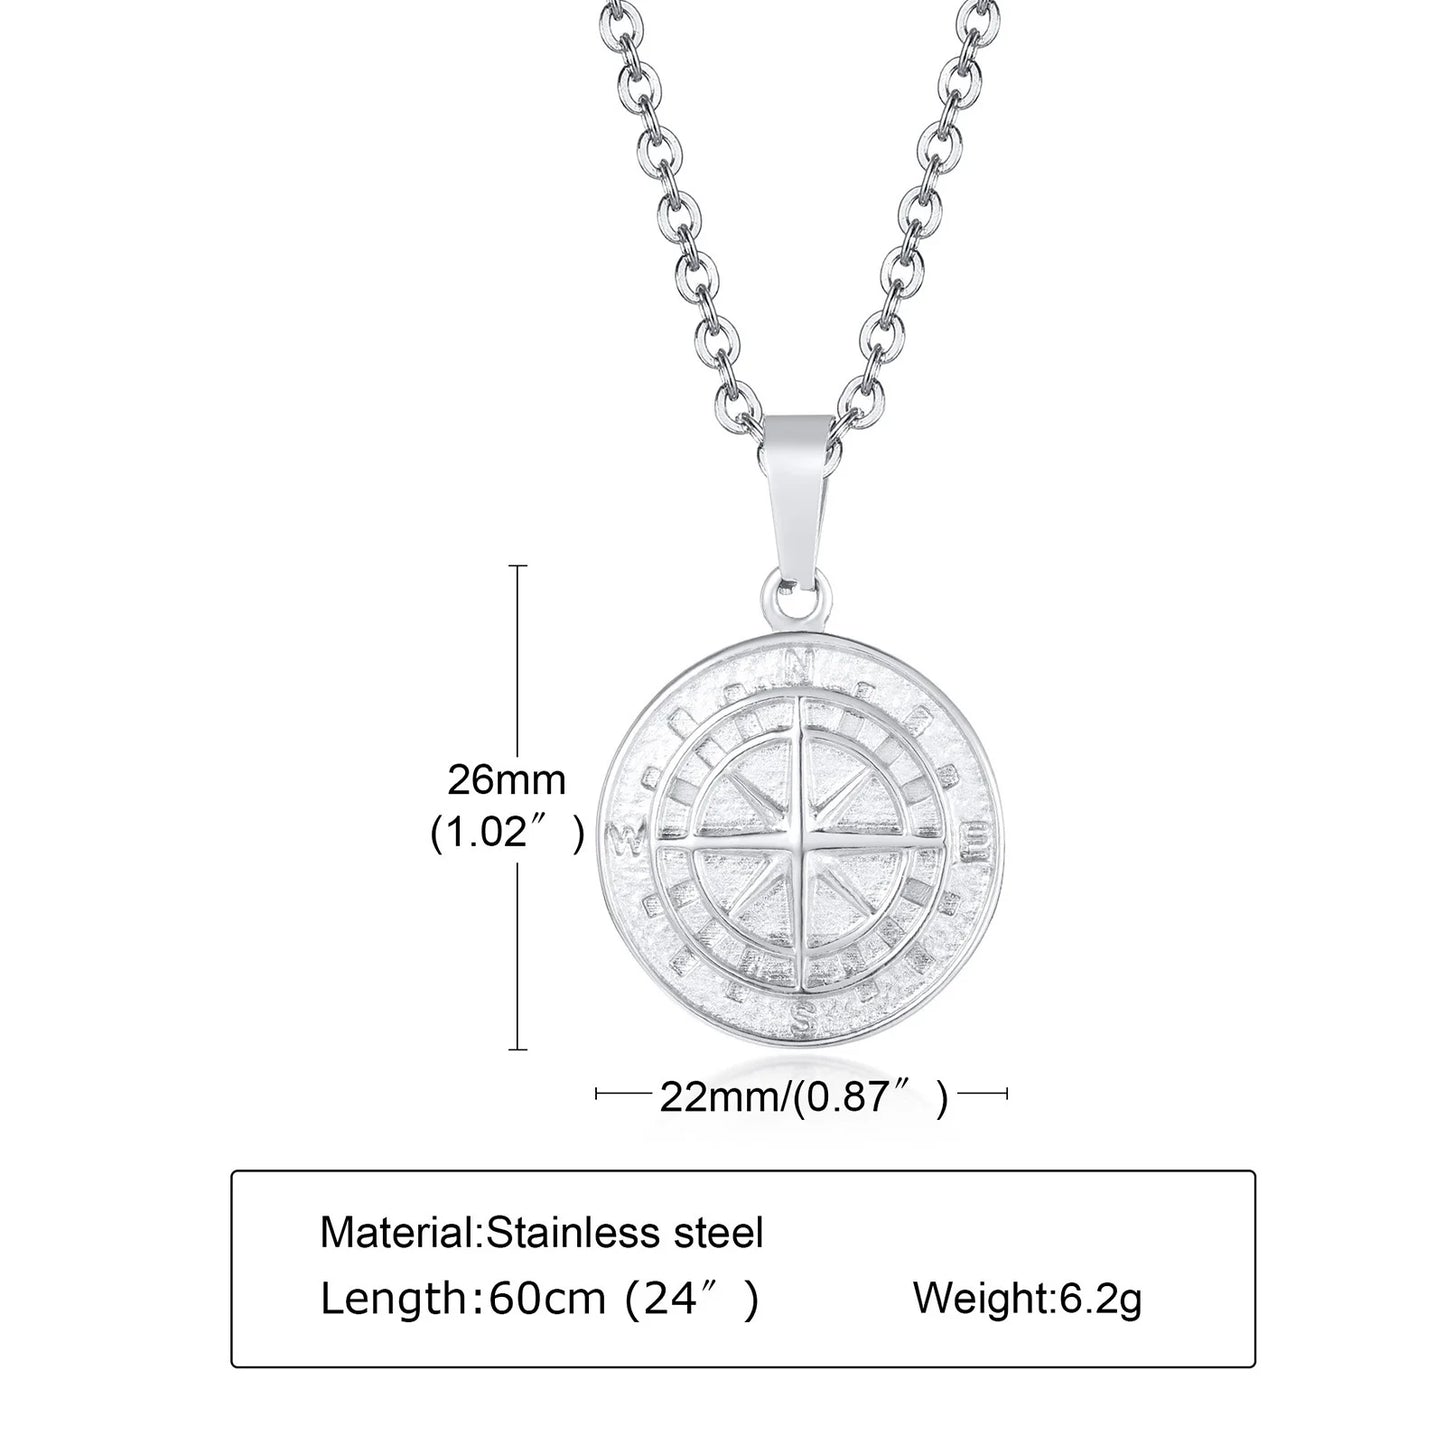 Layered Necklaces with Sailing Travel Compass Pendant, anti rust Stainless Steel